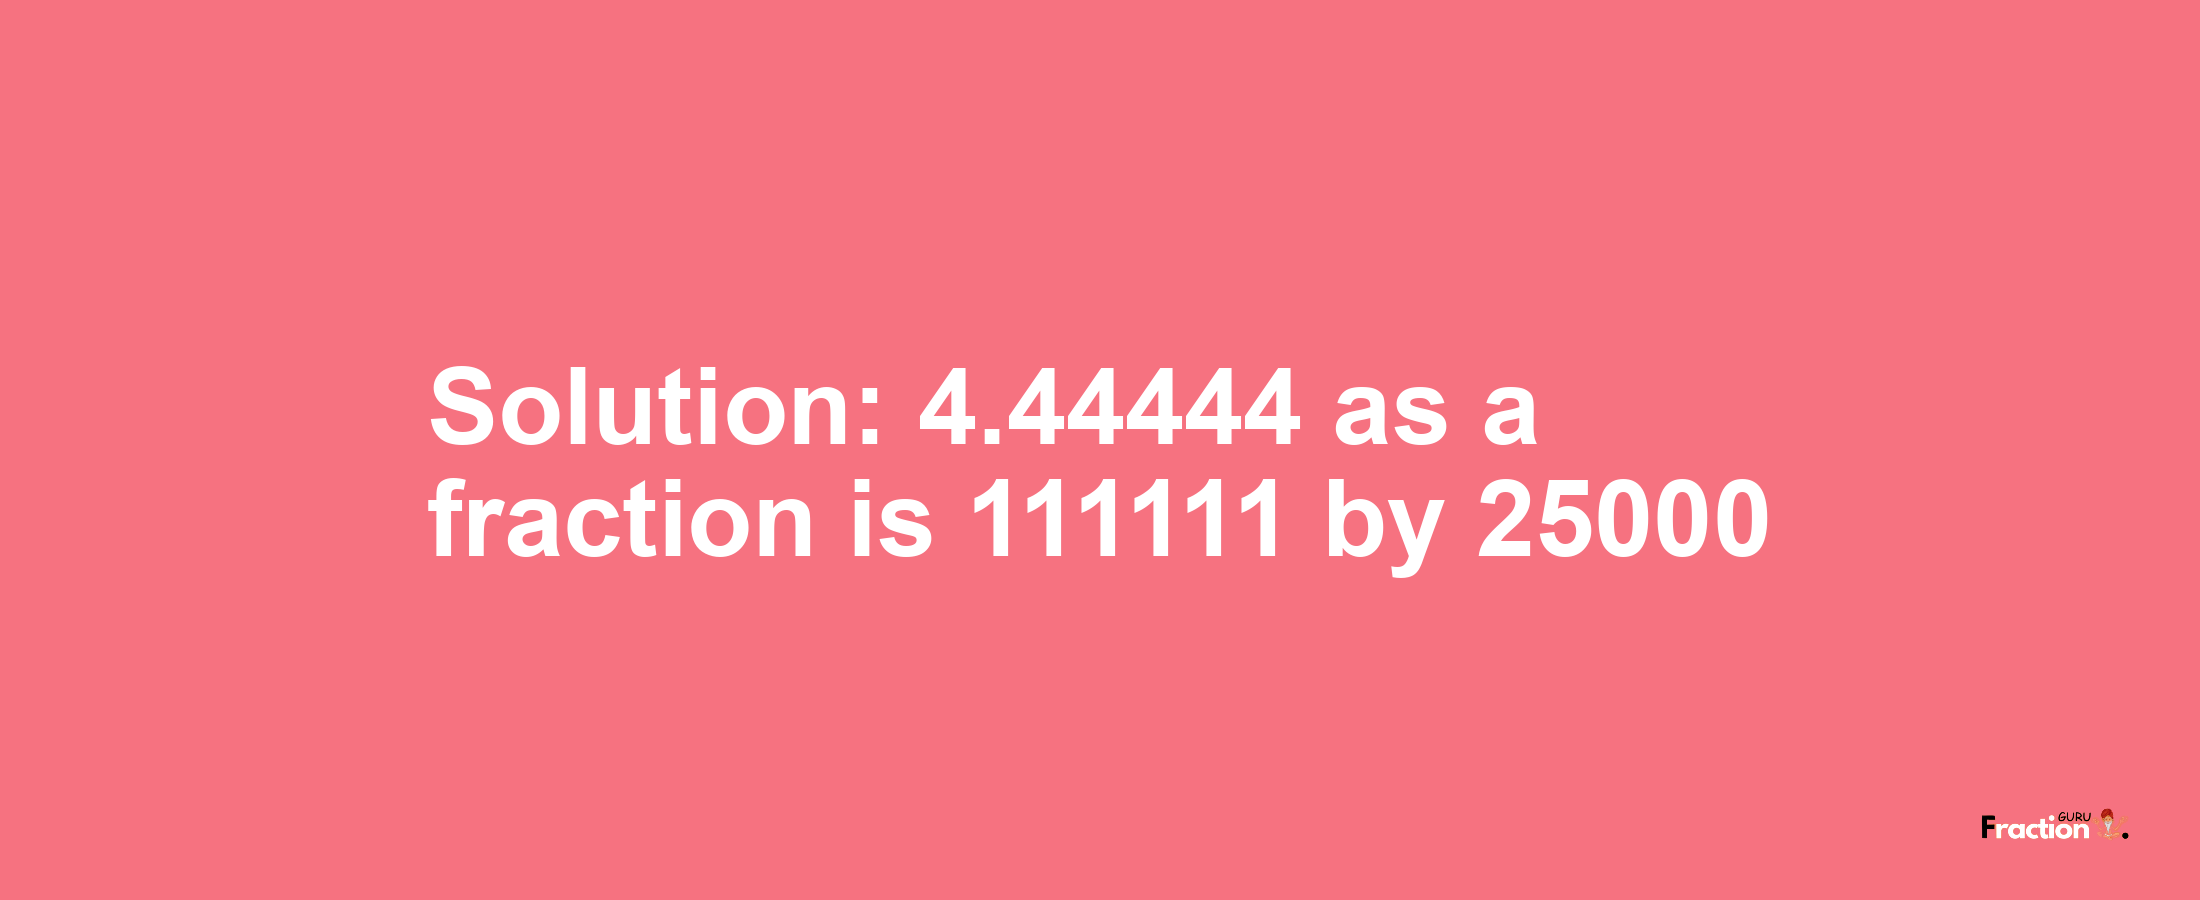 Solution:4.44444 as a fraction is 111111/25000